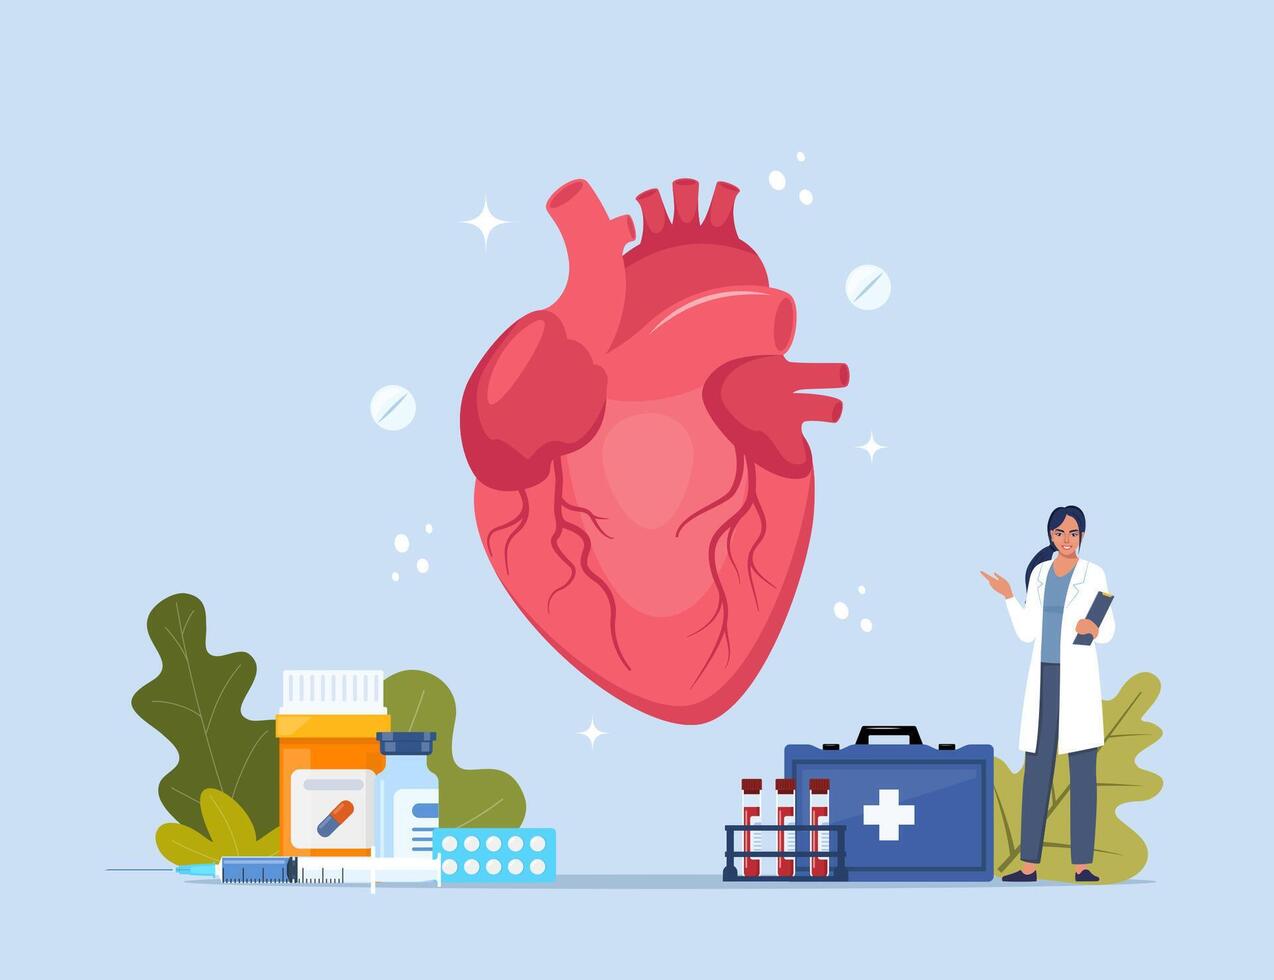 Human heart. Inner organs disease treatment. Modern design concept with tiny doctor character, medical drugs, equipment, analysis. Illustration. vector